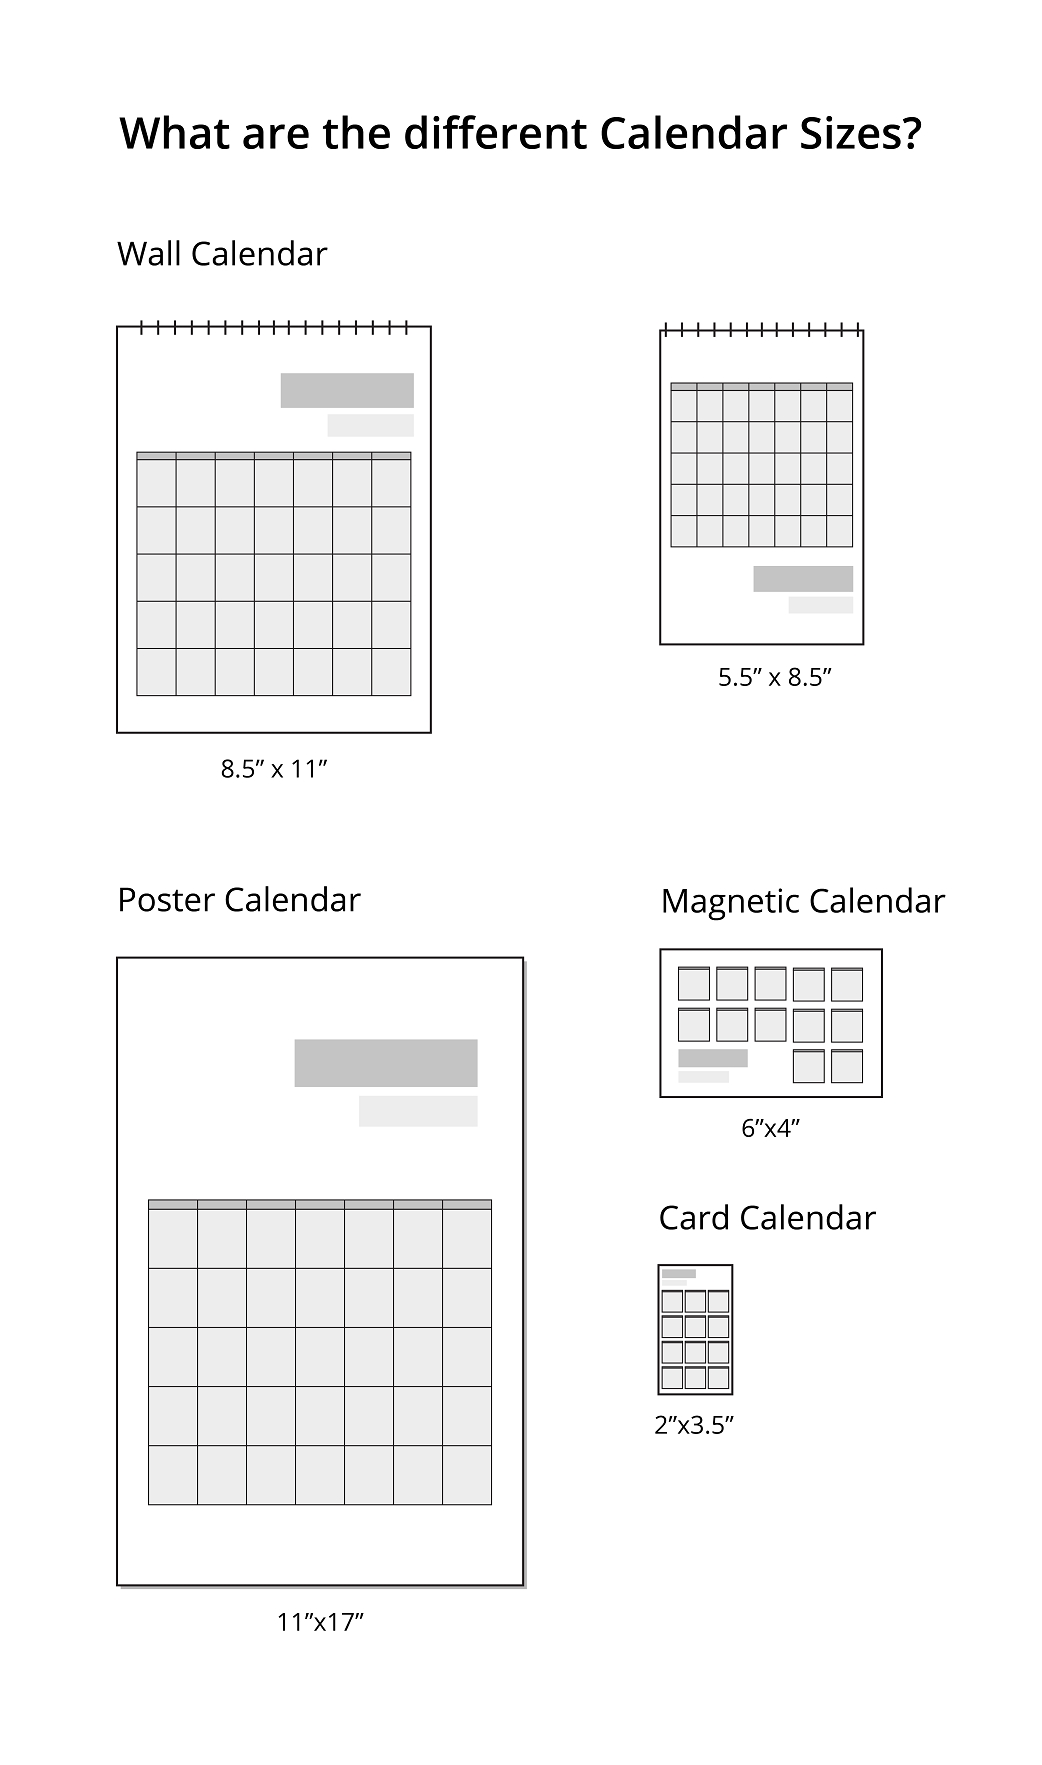 What Are The Different Calendar Sizes? | Uprinting